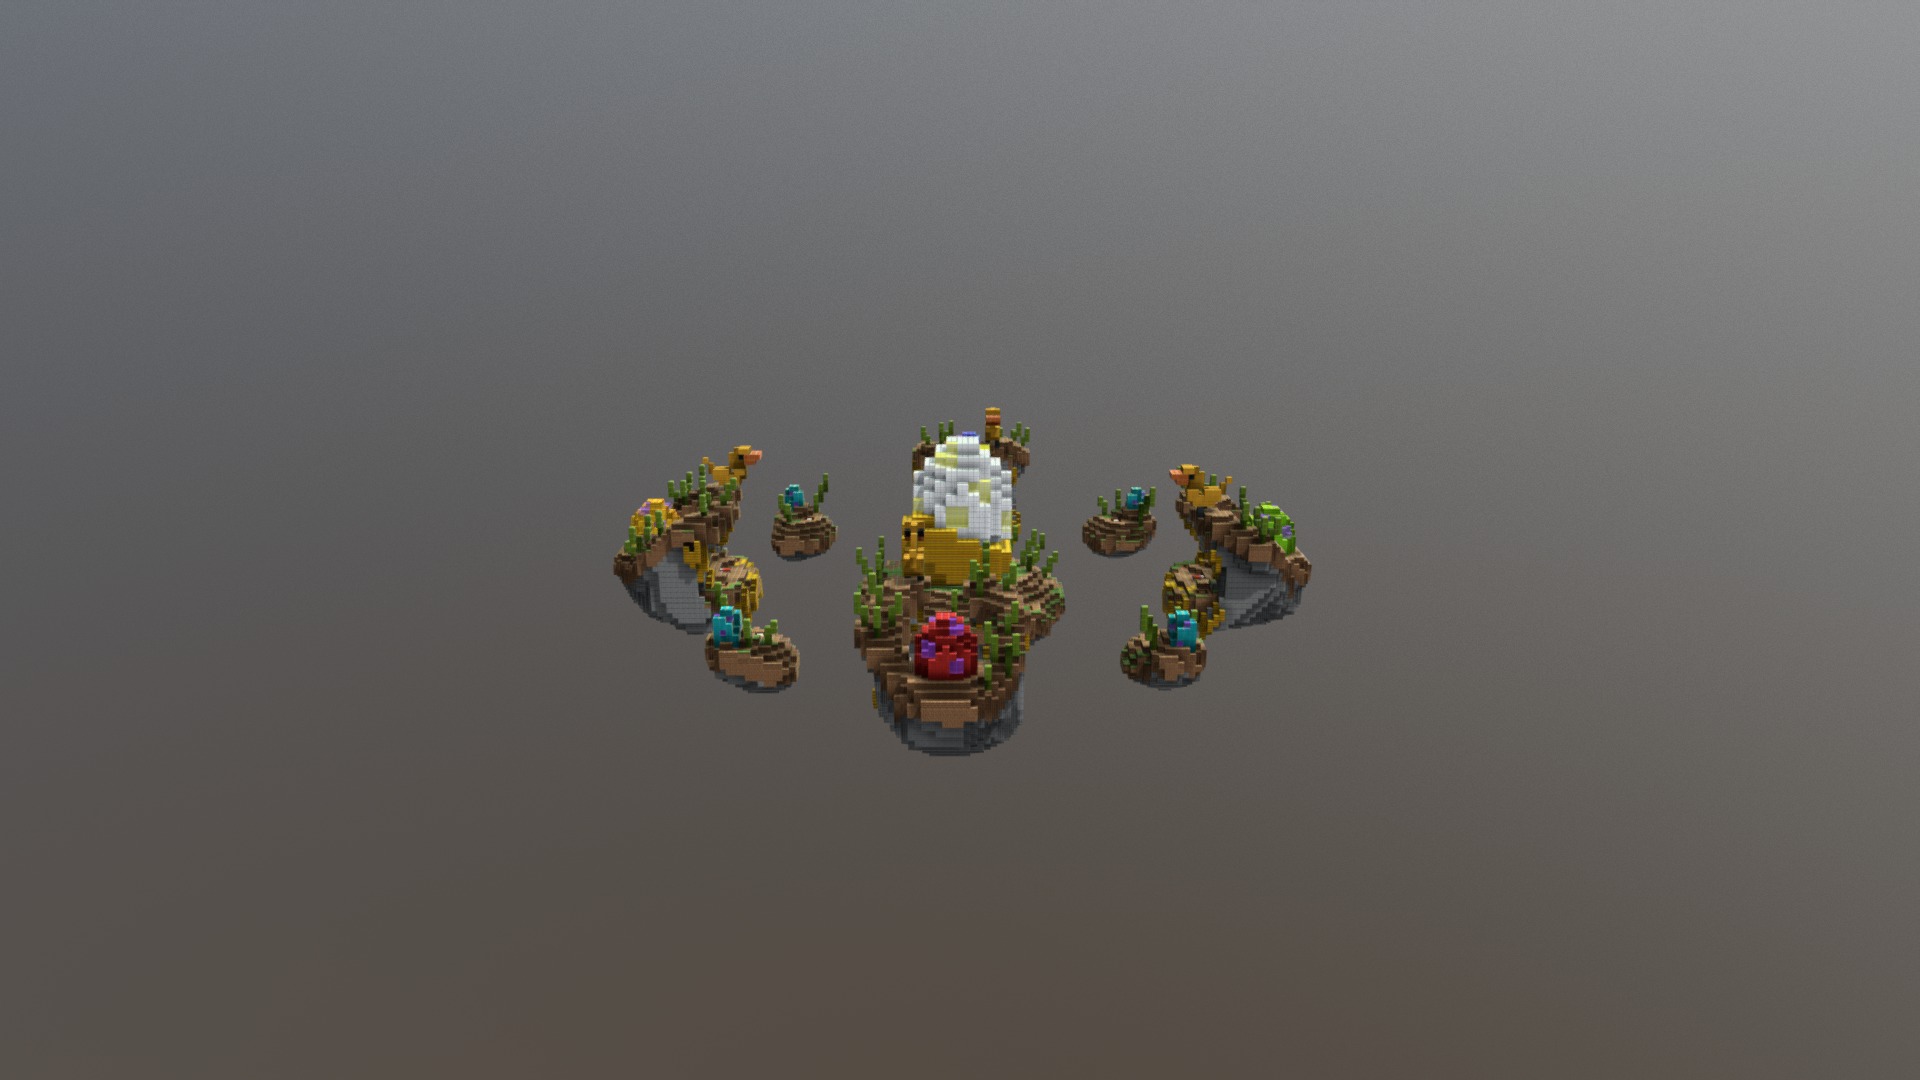 3D model Eggs 4×4 BedWars - This is a 3D model of the Eggs 4x4 BedWars. The 3D model is about a group of toy buildings.